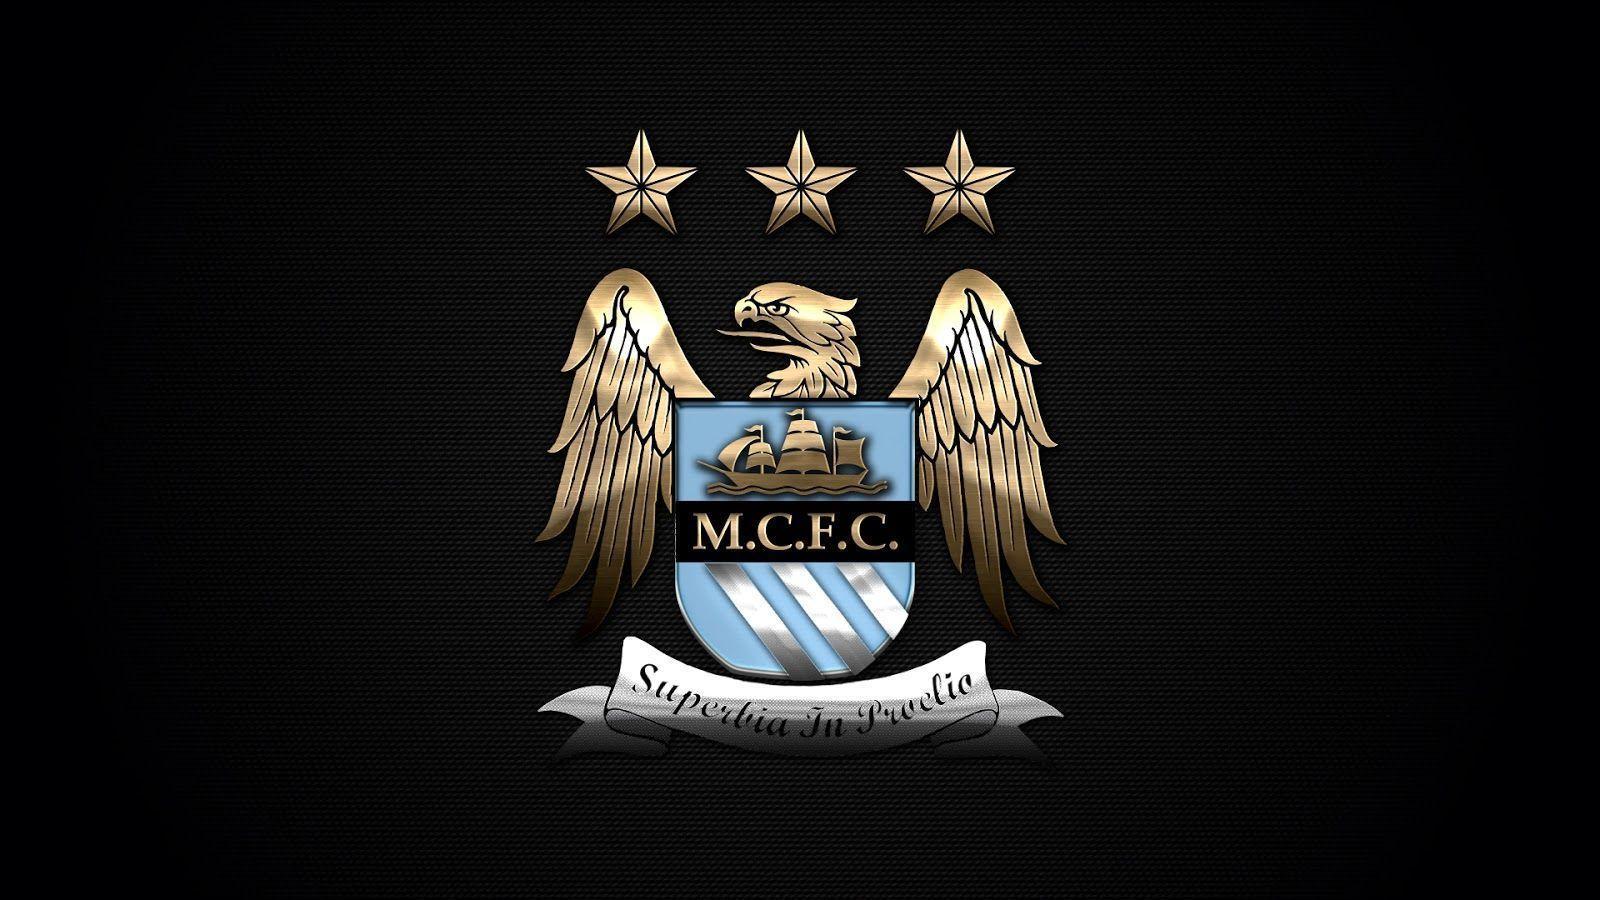 47+ Wallpaper Man City Liverpool Pictures